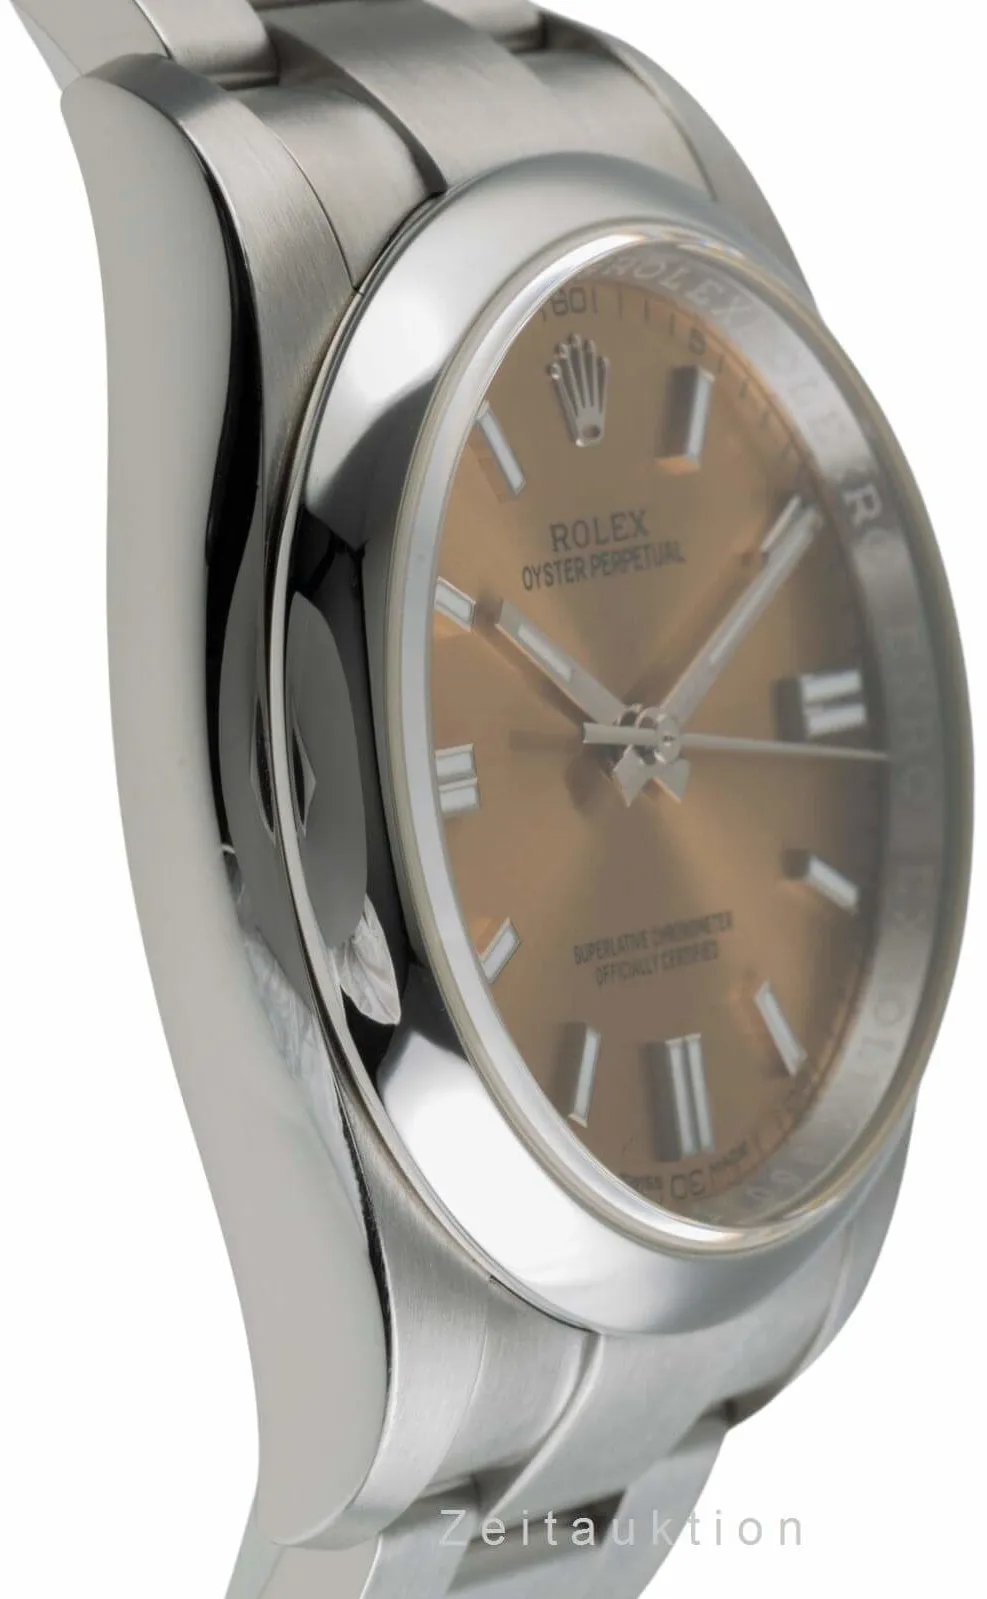 Rolex Oyster Perpetual 116000 36mm Stainless steel 6